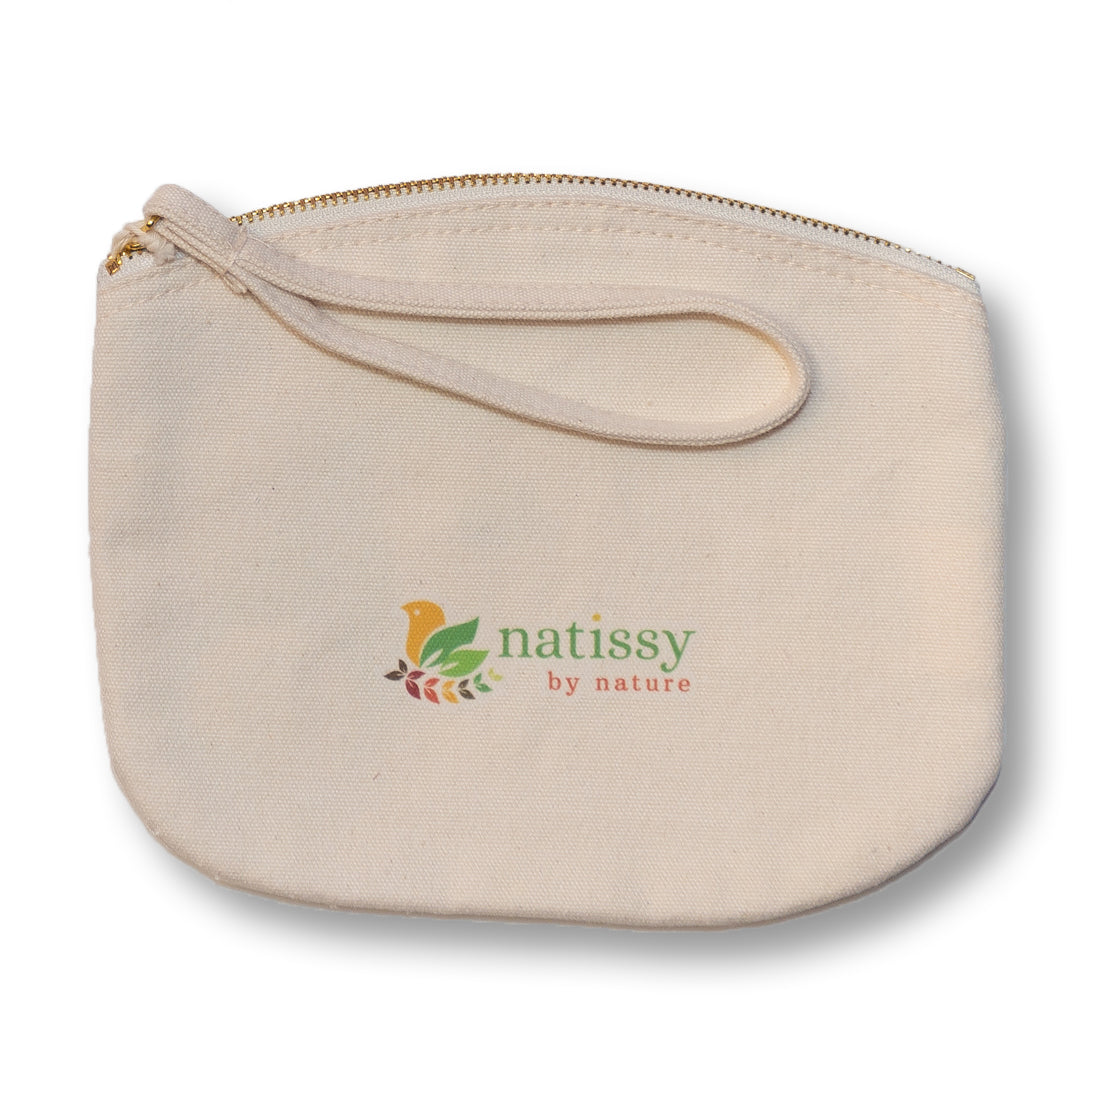 Organic Cotton Carrying Bag, perfect Storage for Reusable Sanitary Pantyliners, Menstrual Towels, Makeup Remover Pads and Washable Nursing Pads; Neatly Stored, always with you and waiting to be reused